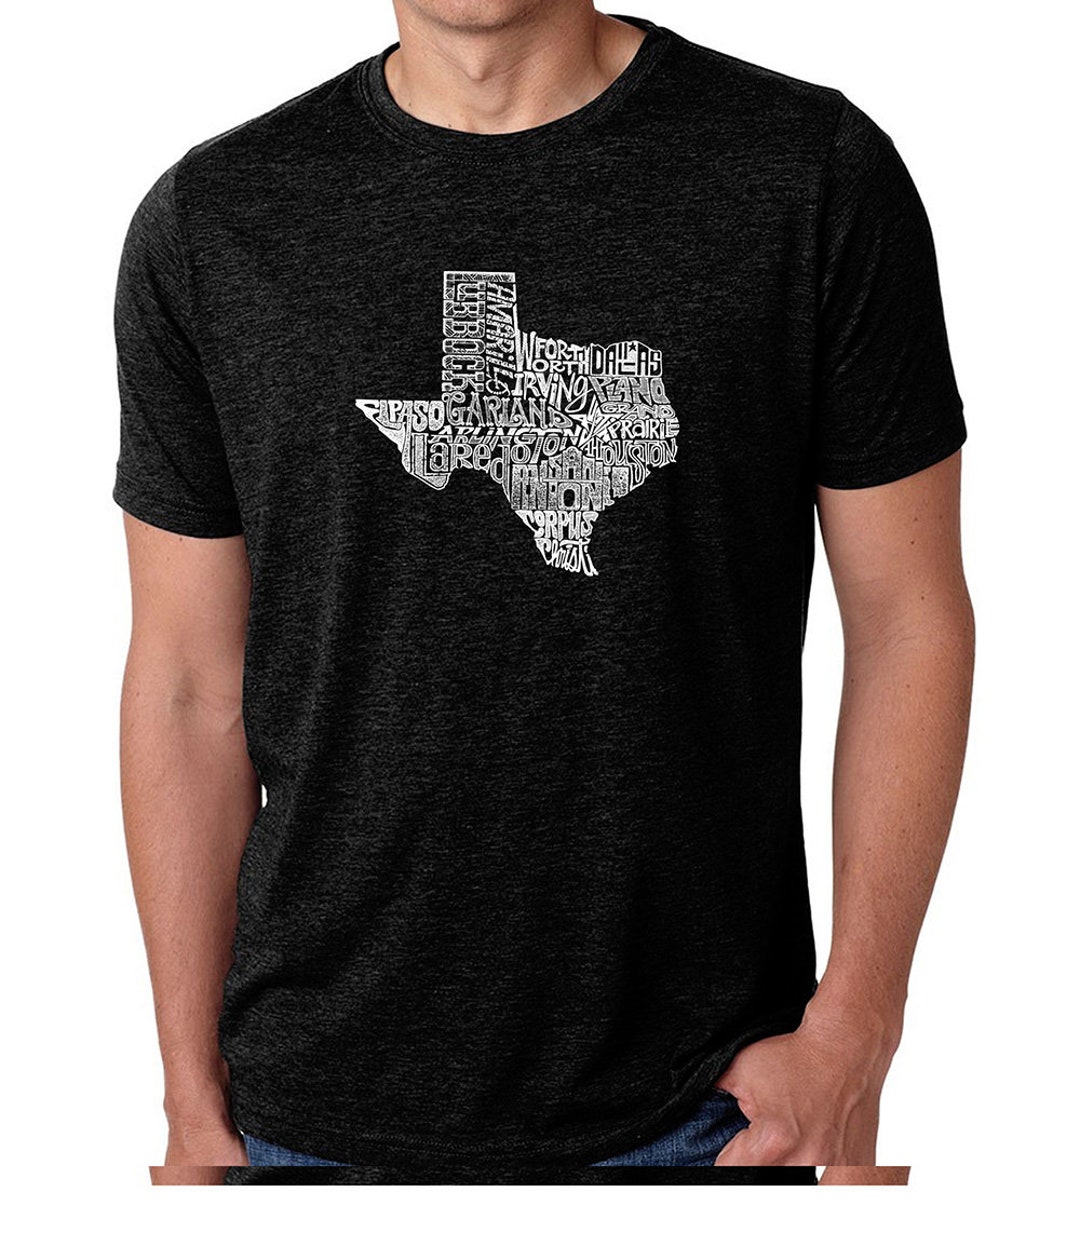 Men's Premium Blend Word Art T-shirt the Great State of Texas - Etsy